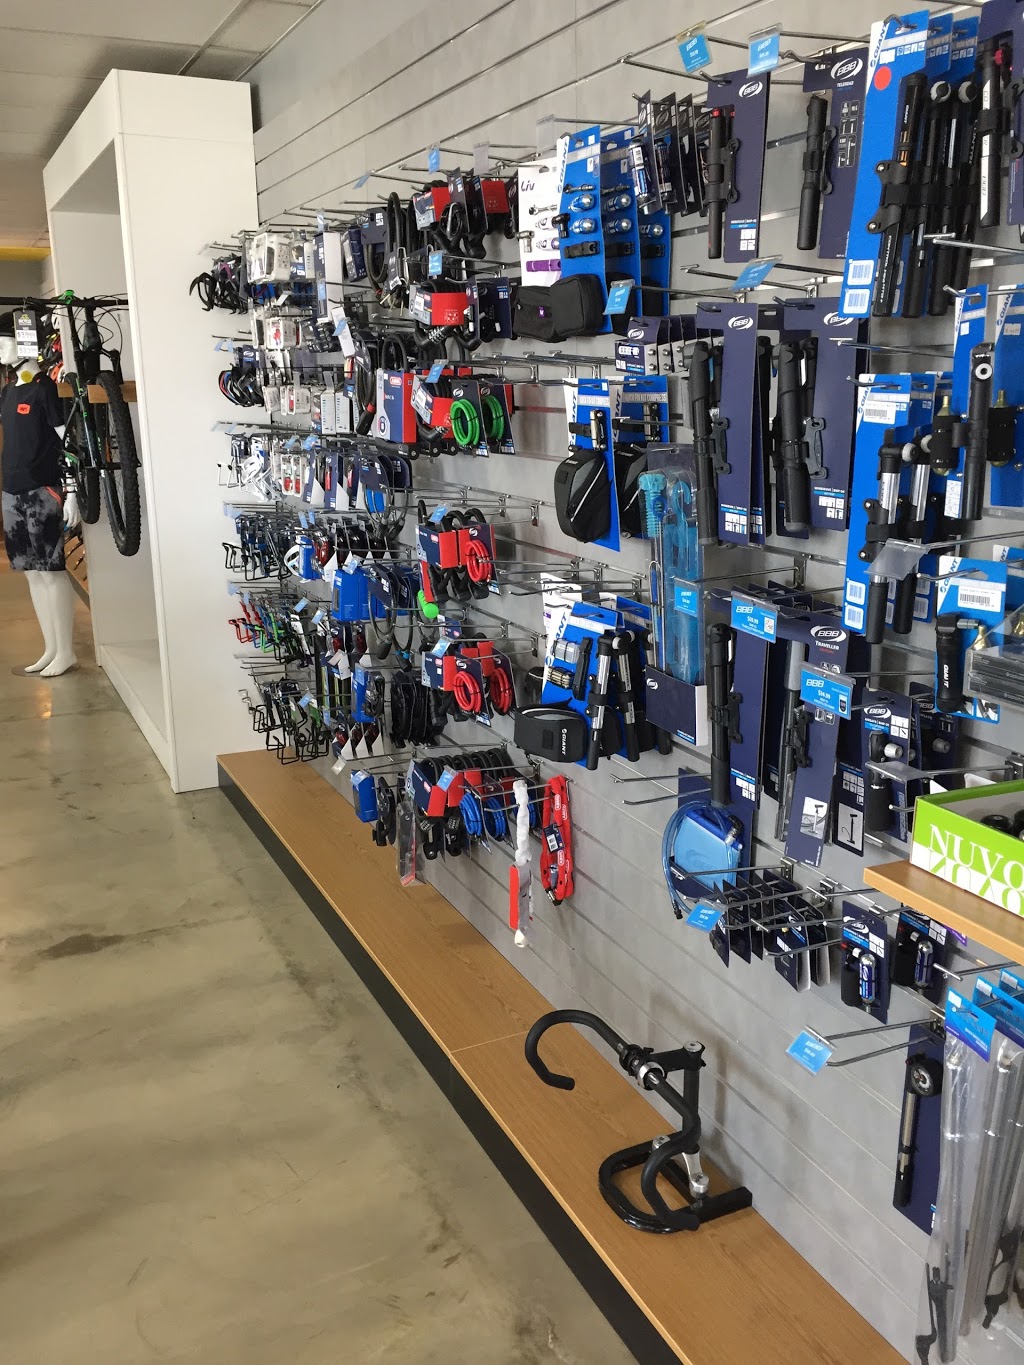 Bicycle Superstore | bicycle store | 30-32 Nepean Hwy, Mentone VIC 3194, Australia | 0395837700 OR +61 3 9583 7700